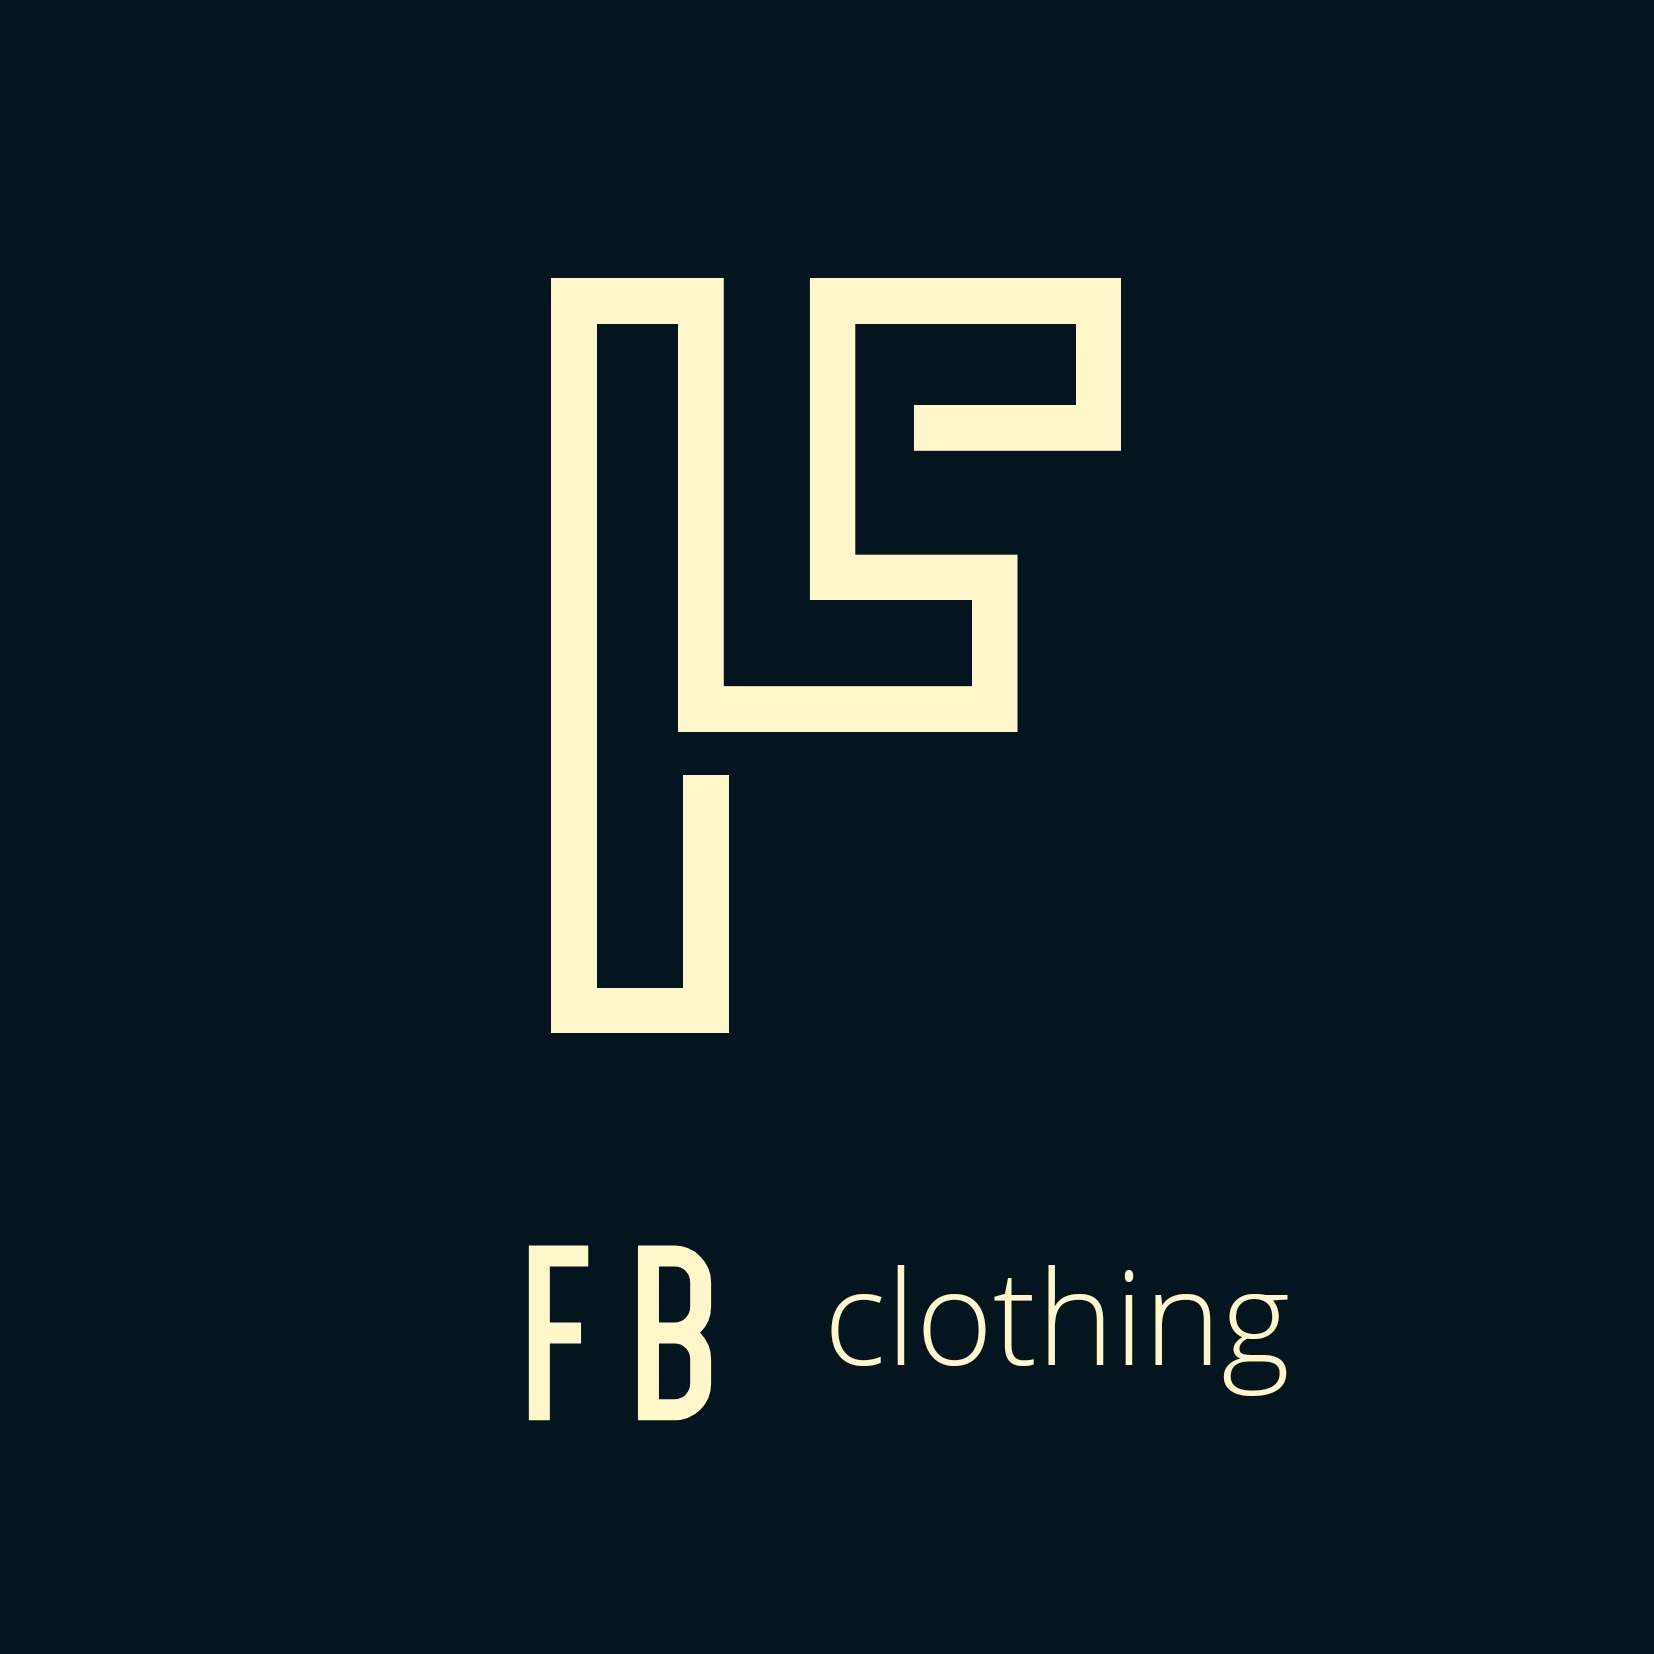 Shop at FB Clothing with great deals online | lazada.com.ph